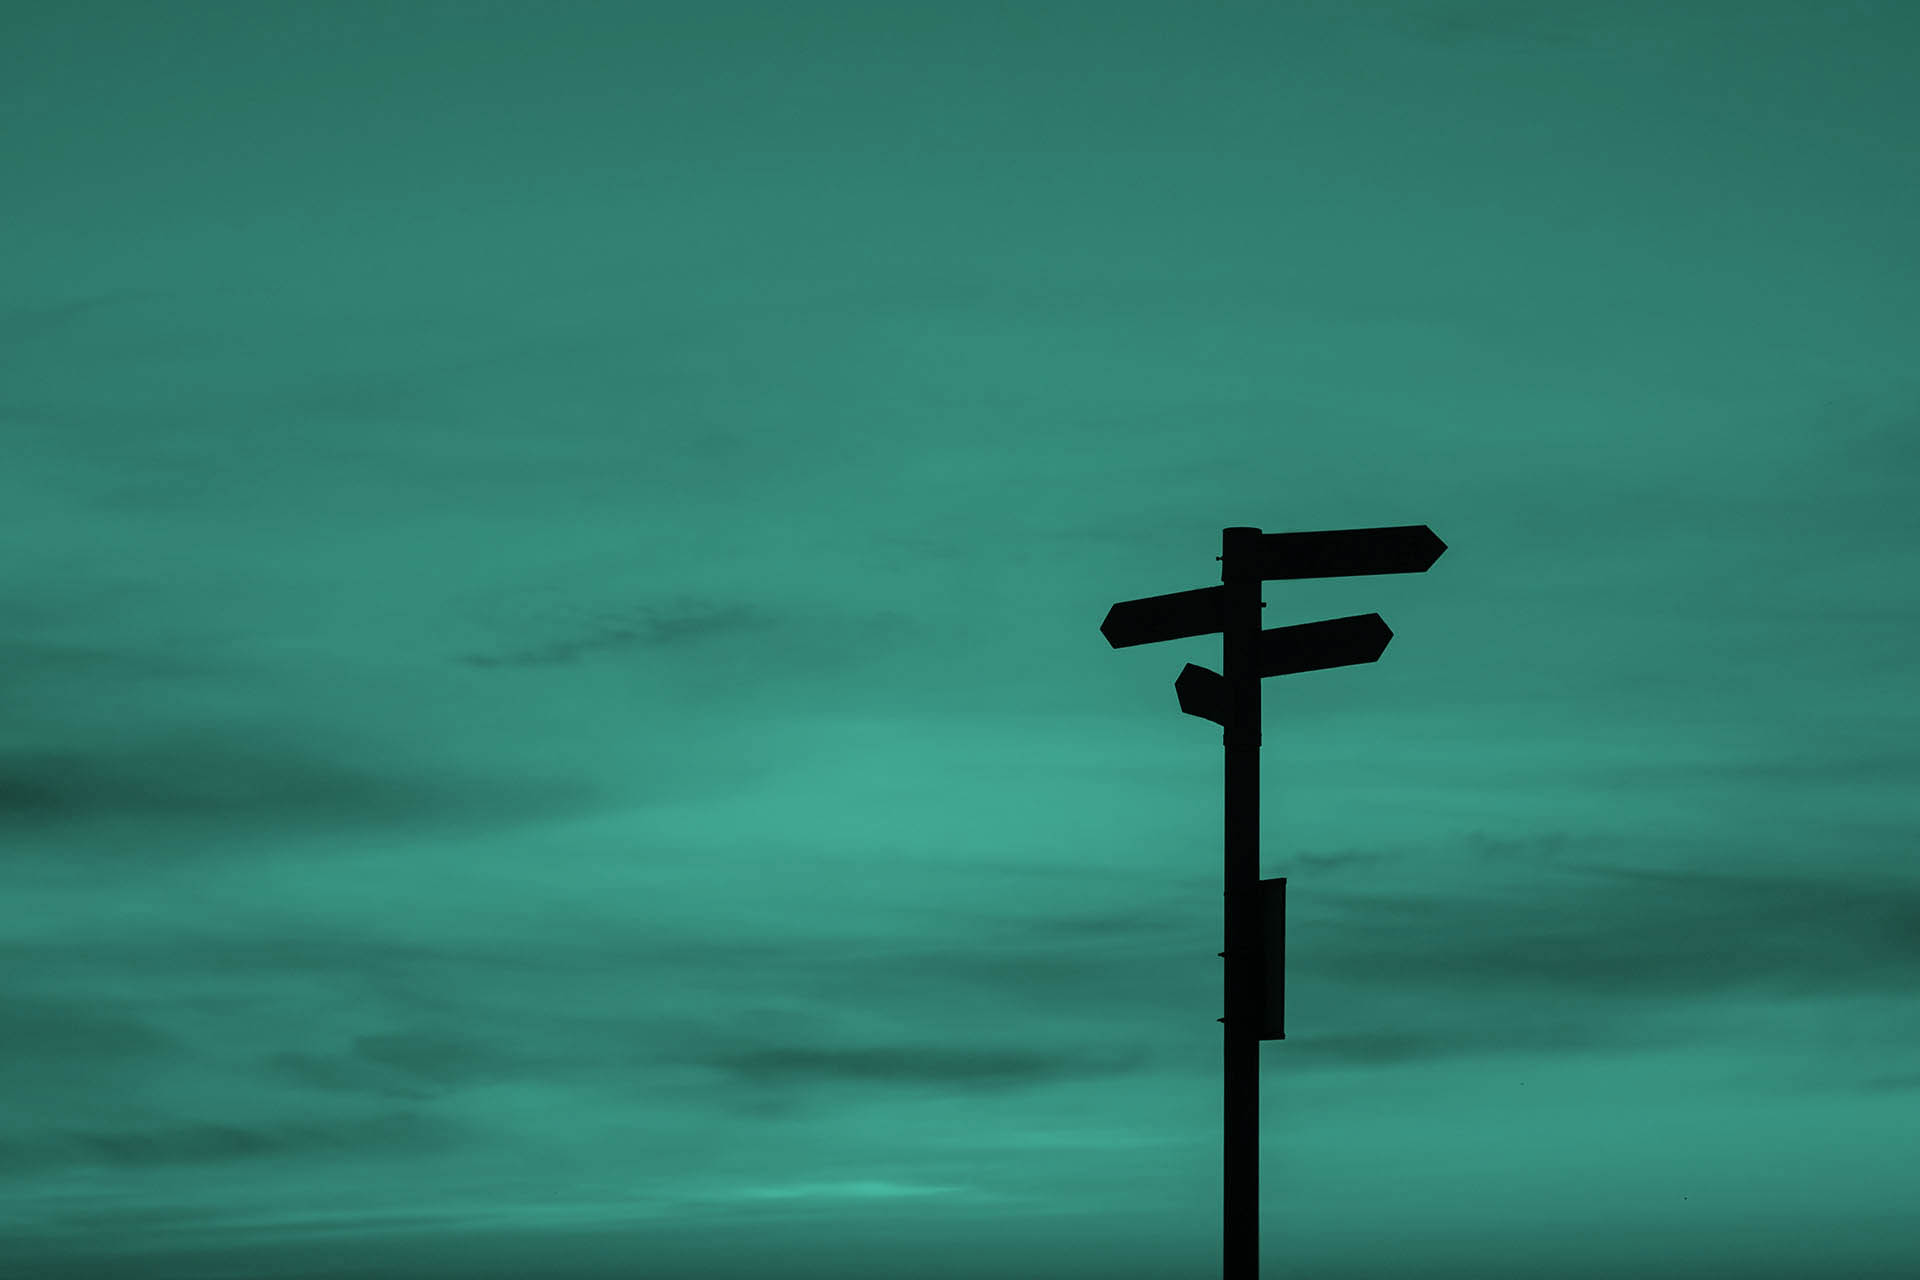 Directional signs, which can only be recognised as black outlines due to the contrast and incidence of light, stand in front of a bluish-red horizon with individual clouds.